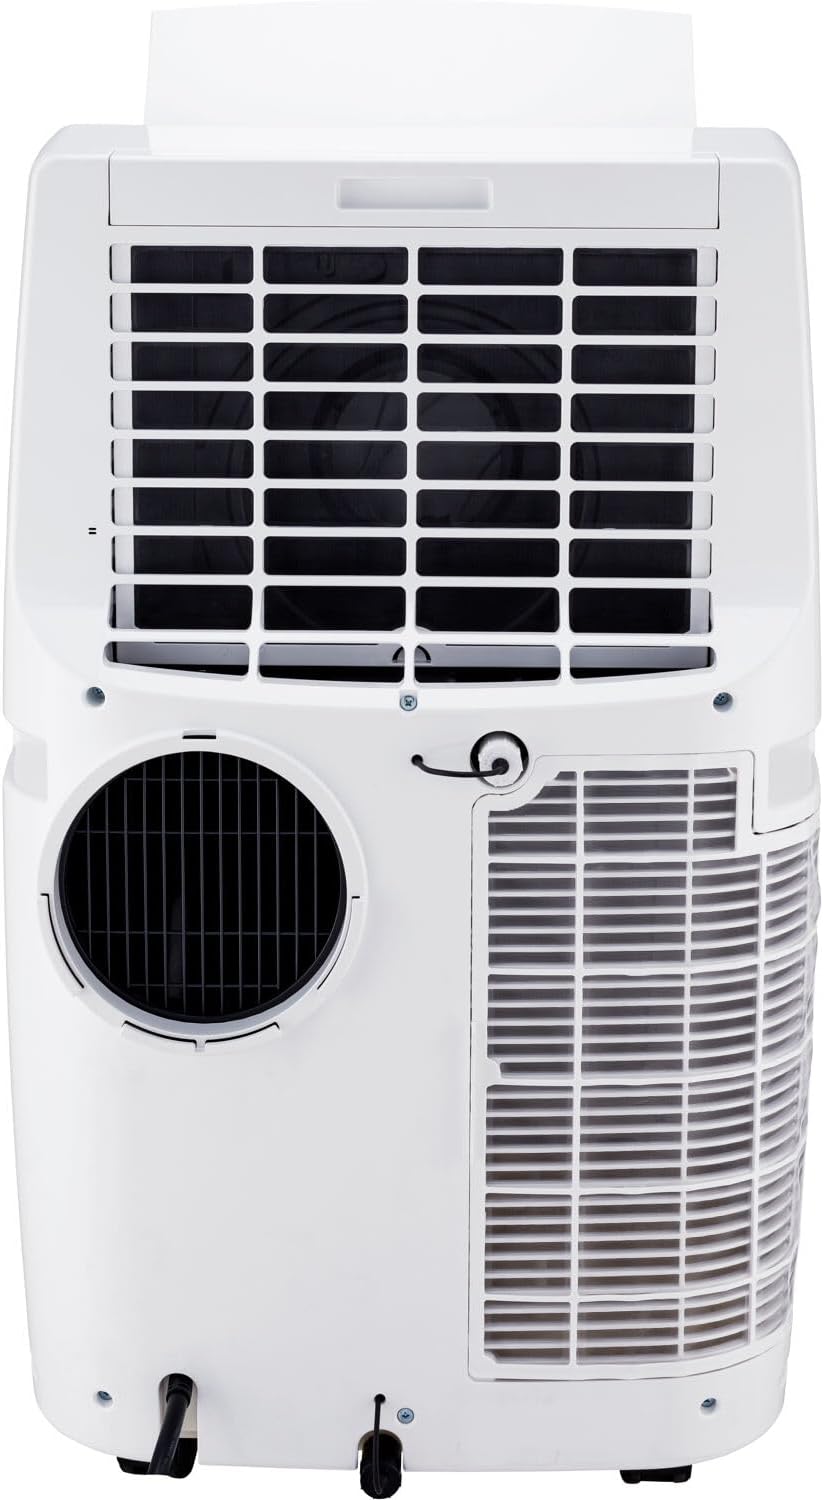 Honeywell Classic Portable Air Conditioner with Dehumidifier & Fan - $365